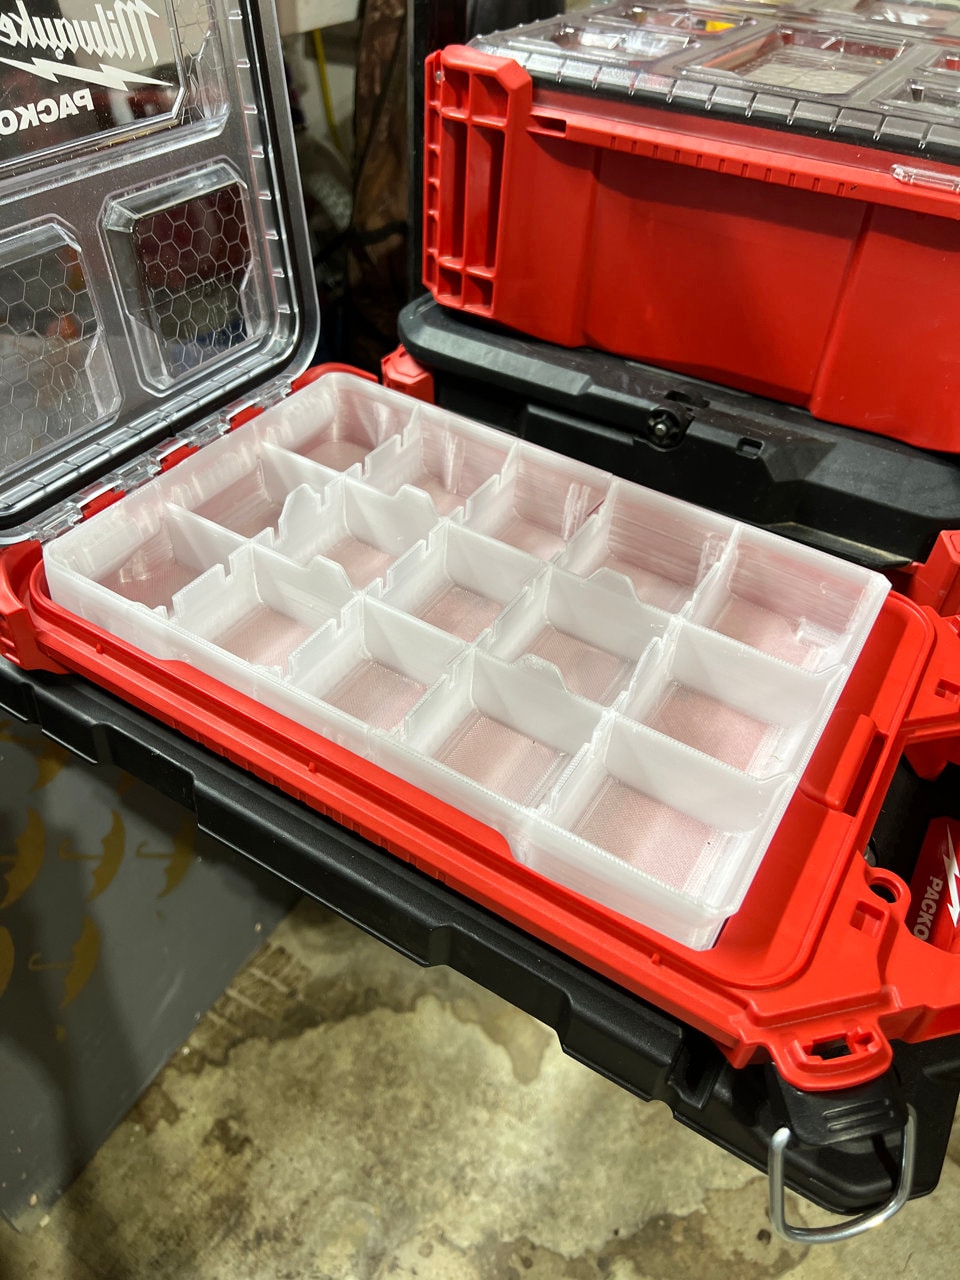 Milwaukee Packout makes for a fine tackle box system : r/Fishing_Gear